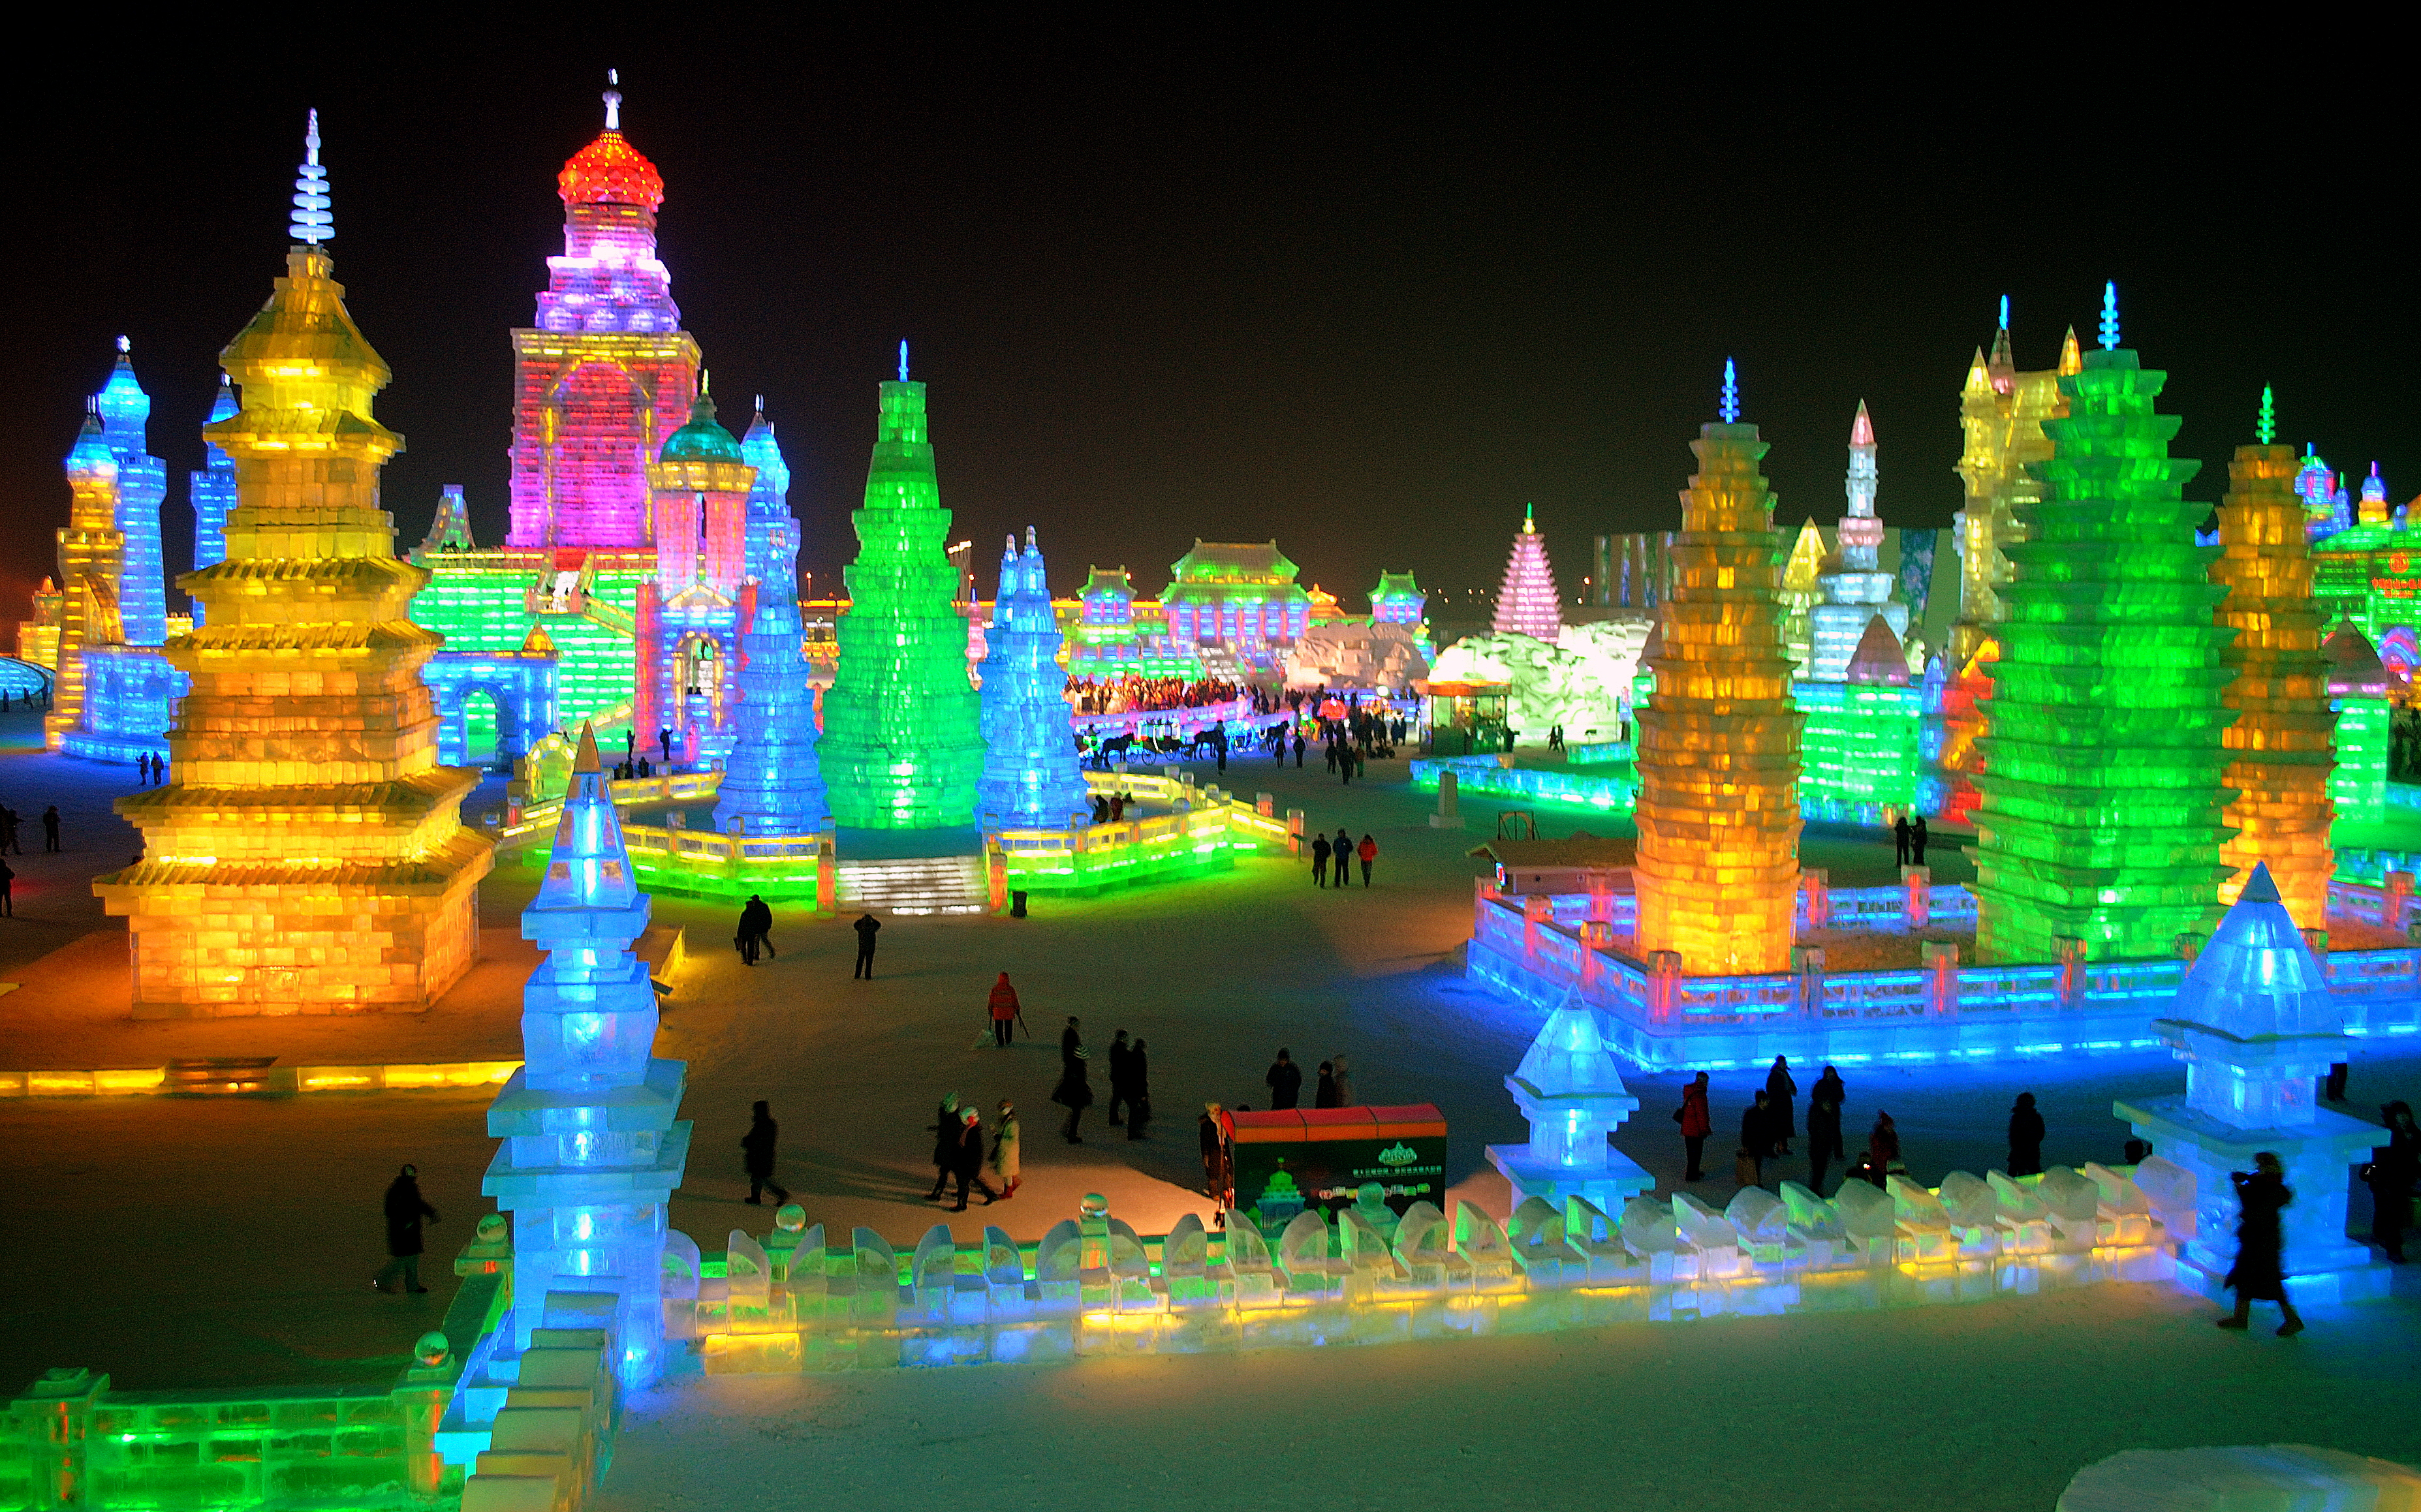 Harbin iceland, China. It is nighttime and the city is all lit up.